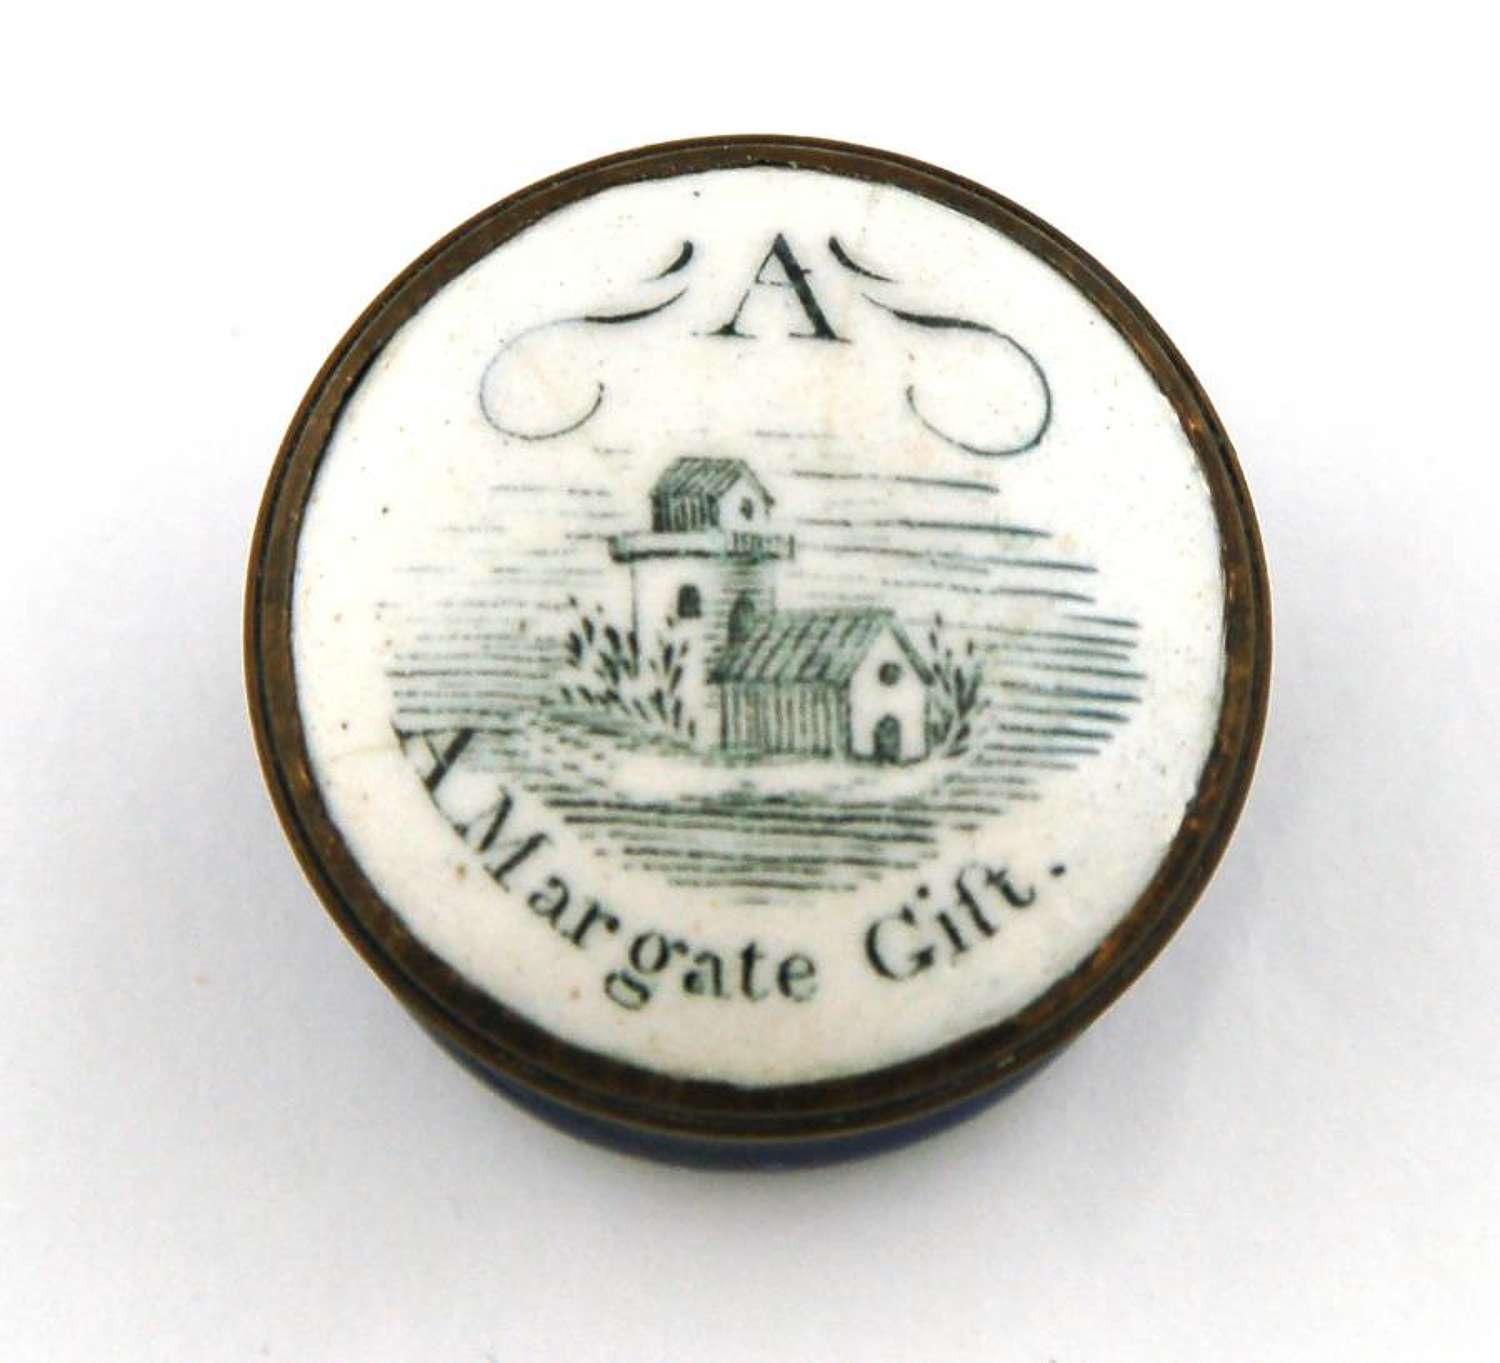 A Margate Gift